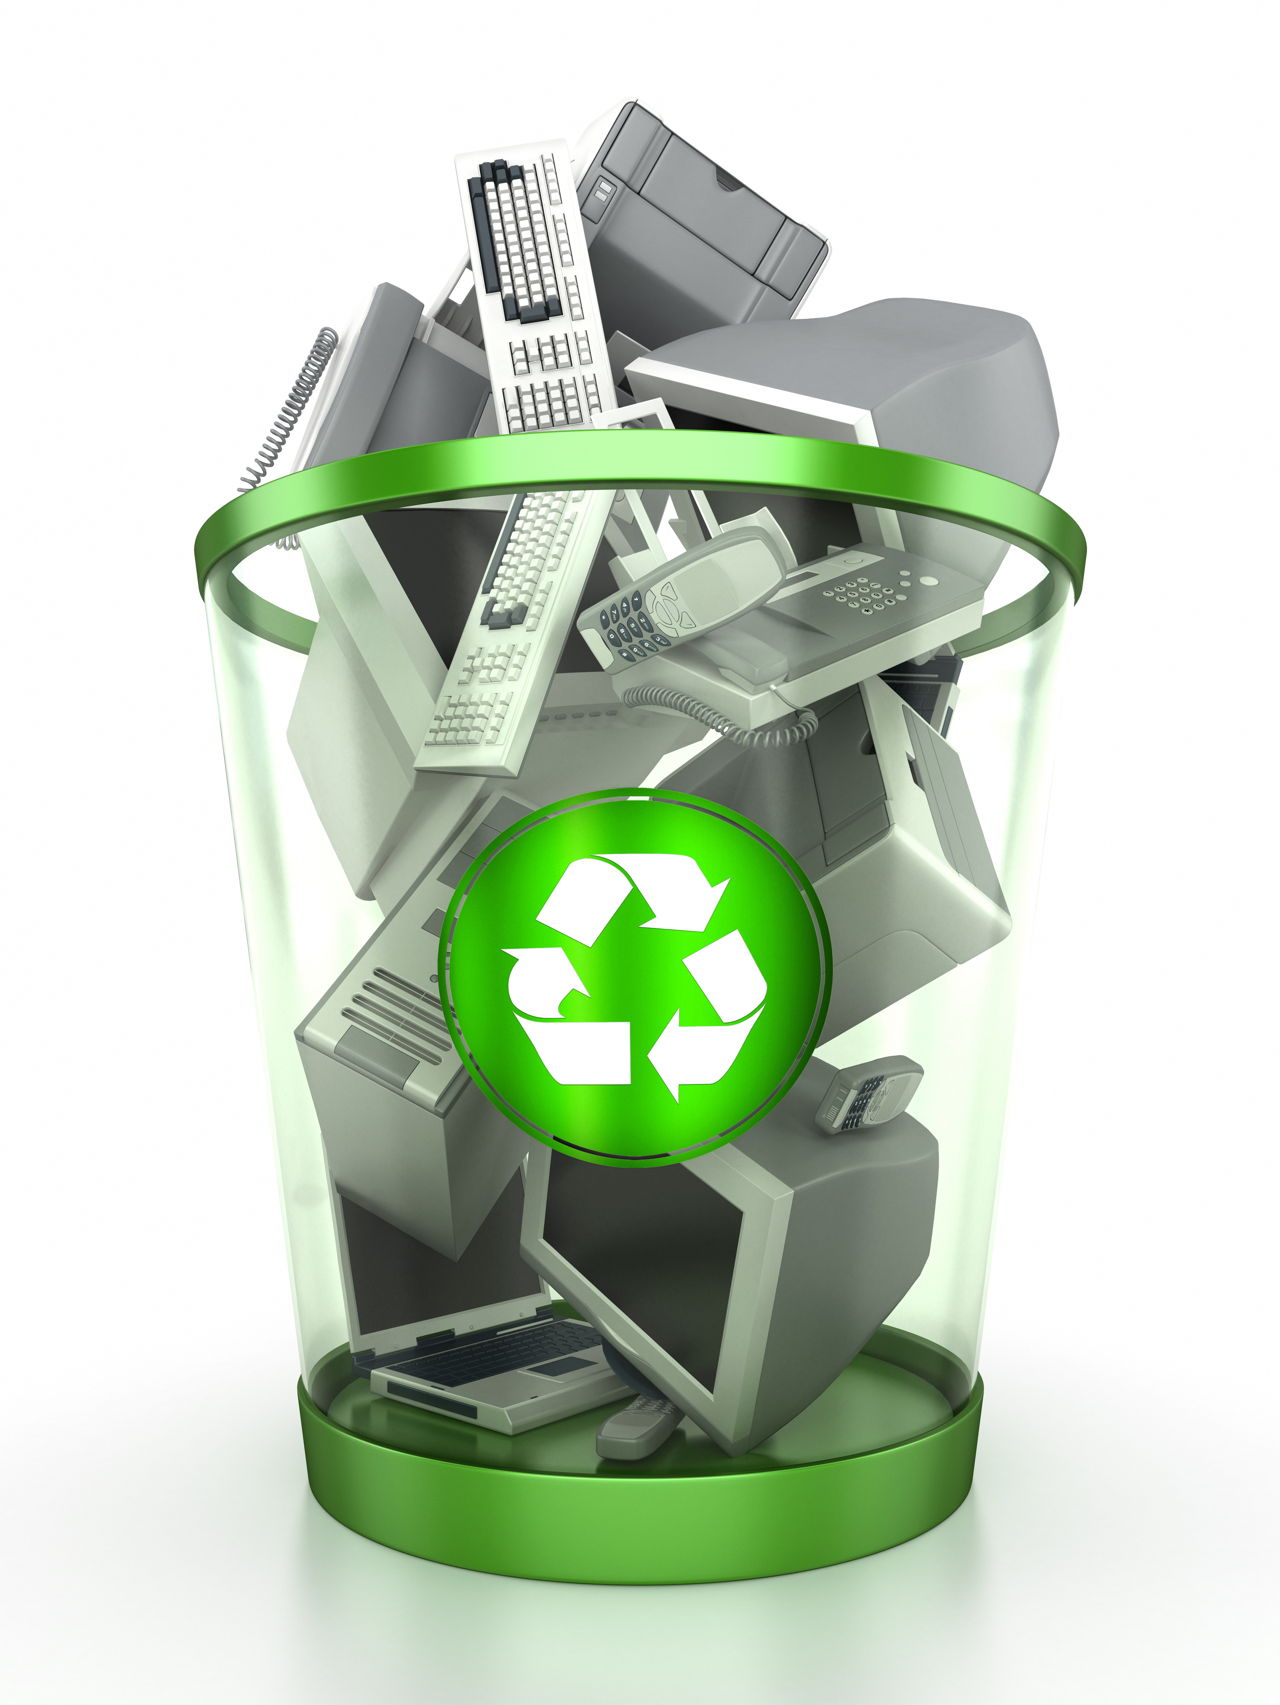 Recycle Bin Png Image Trash Can Recycling Bins Garbage 为什么回收重要？它将如何使环境 ...